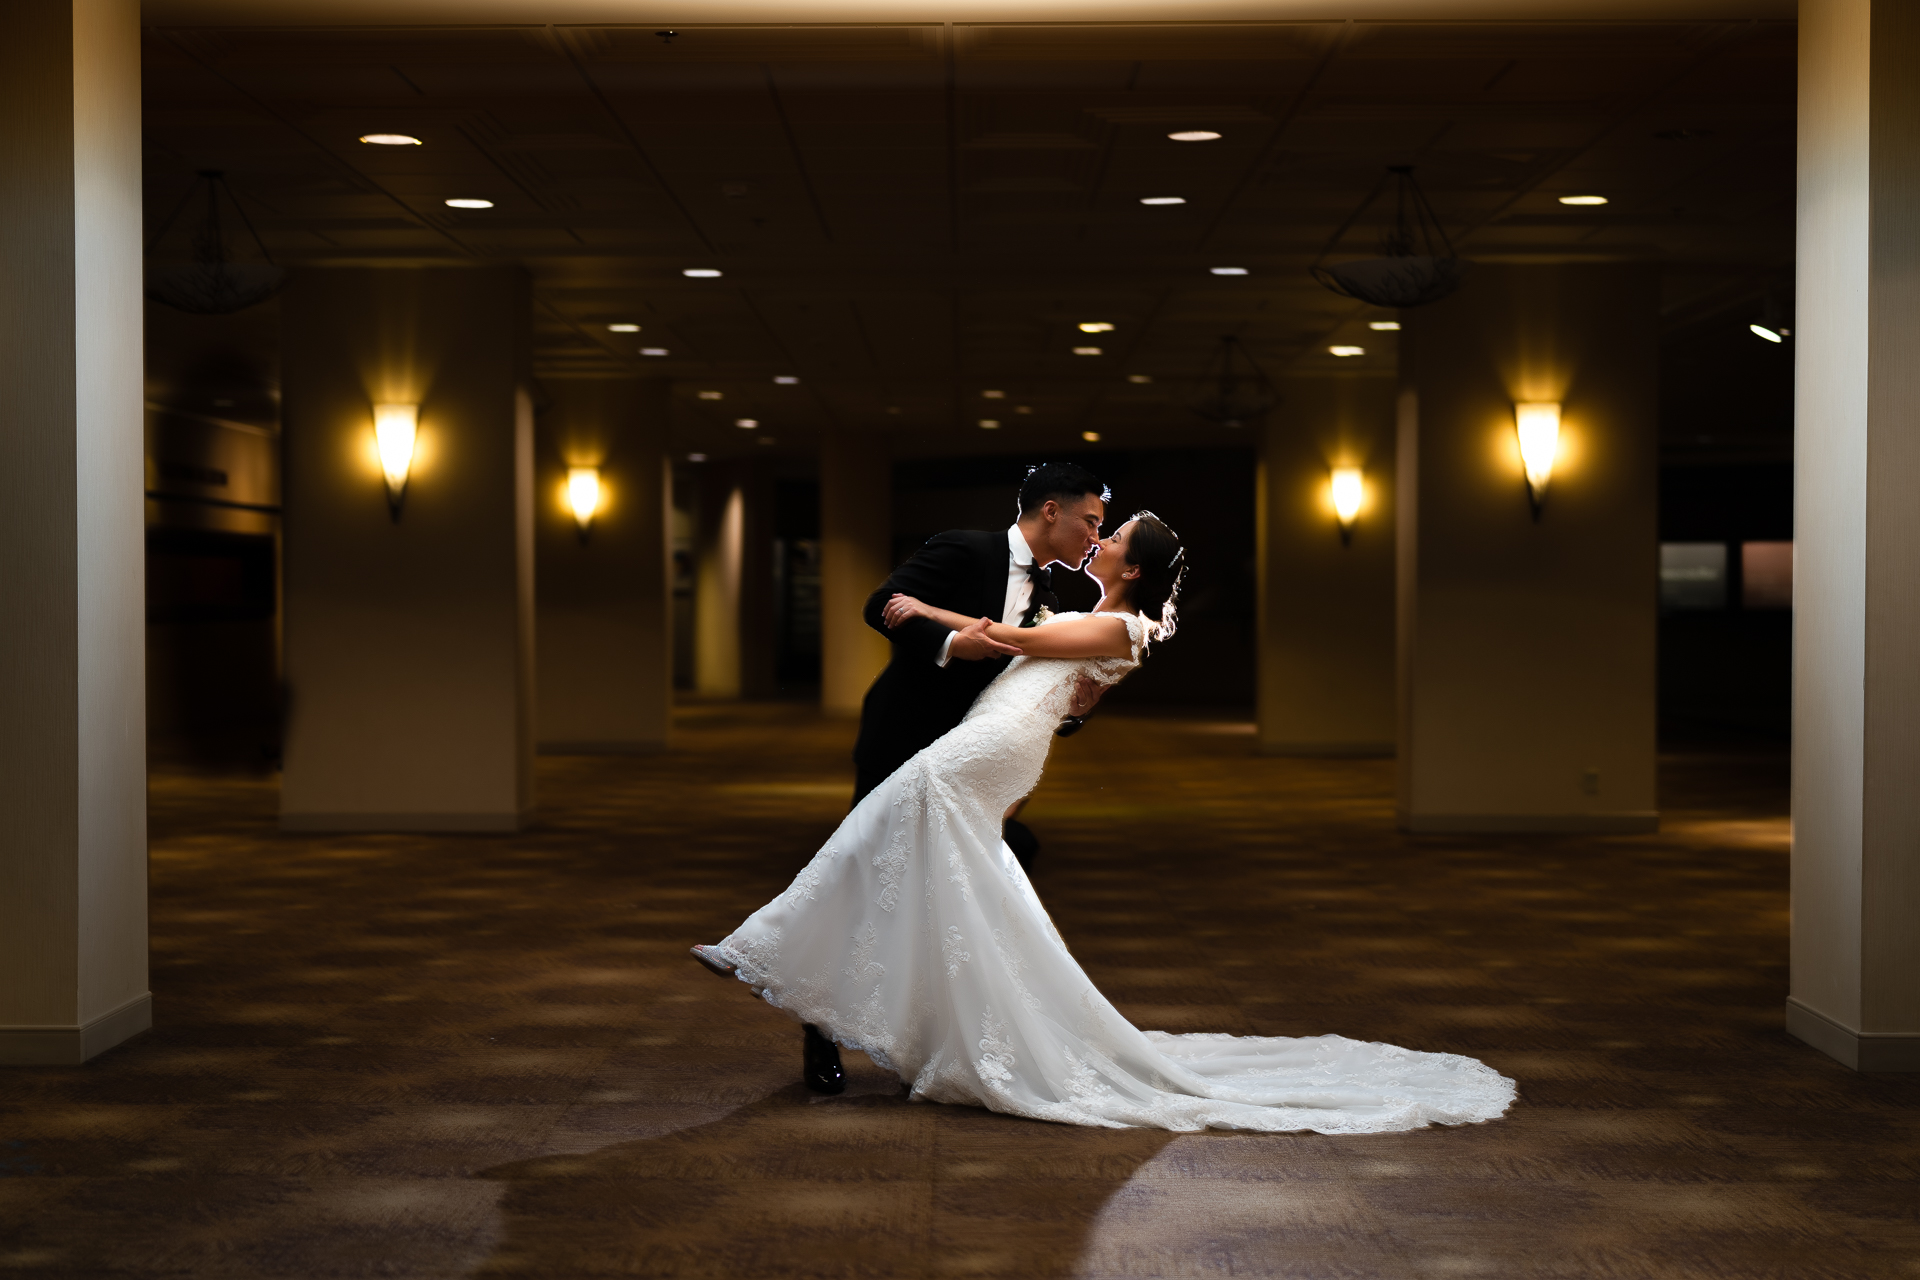 A bride and groom kissing in a dark hallway, captured by photographer Thomas Kim in Los Angeles.